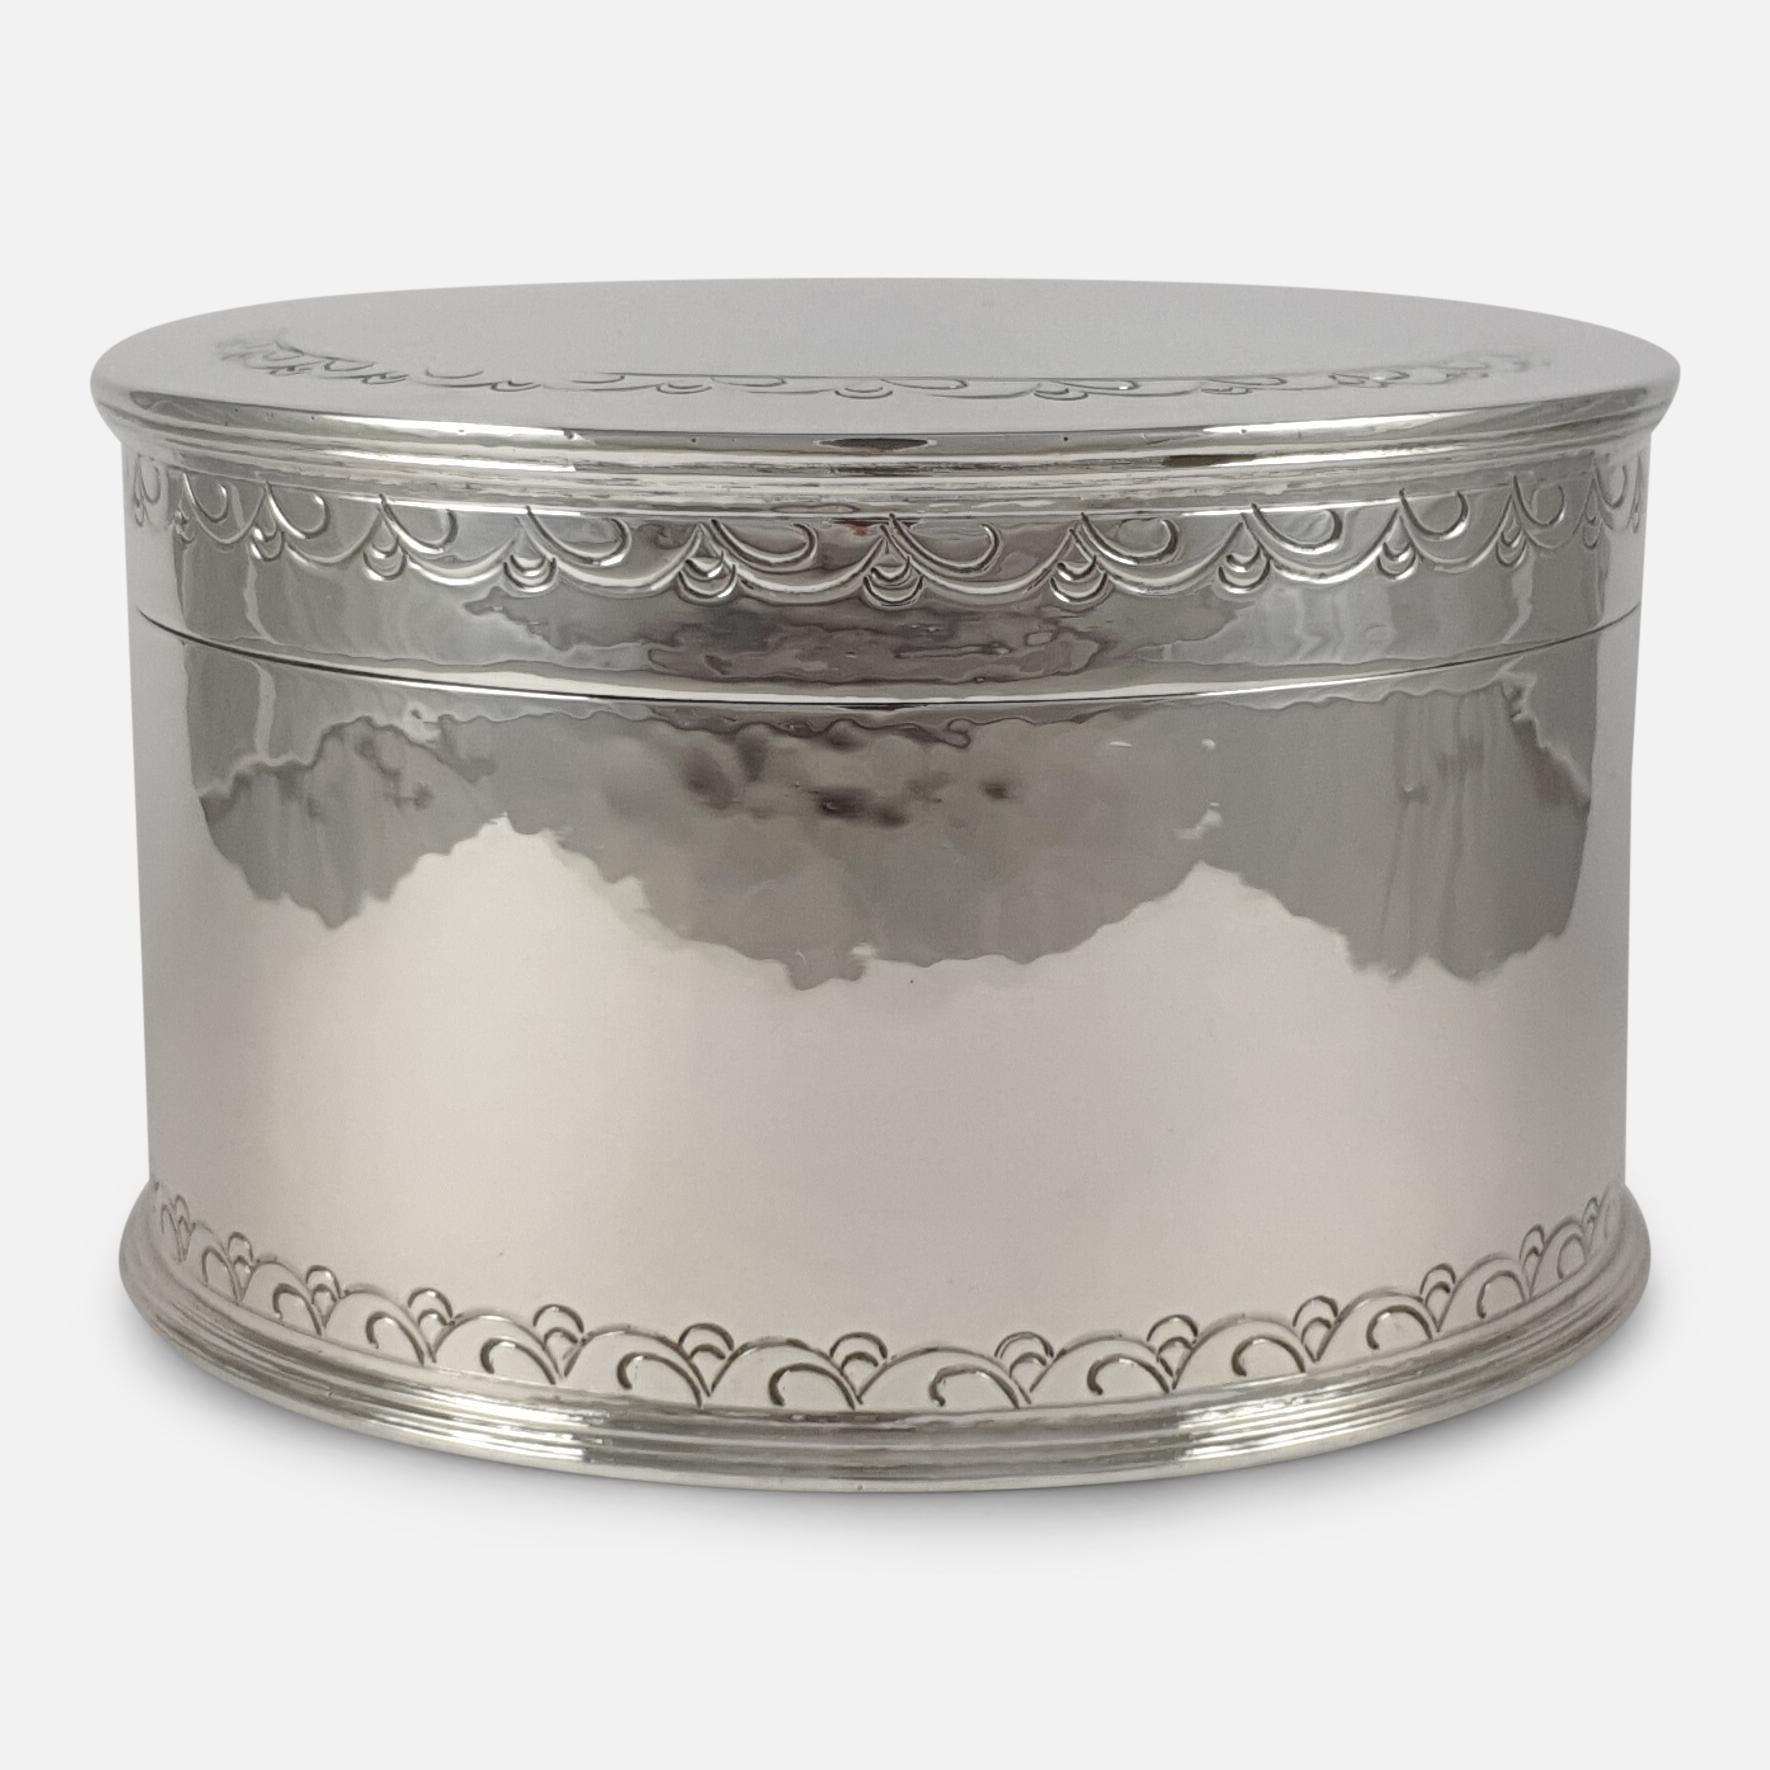 A George V sterling silver biscuit box by Liberty & Co. The biscuit box is of circular form, with hinged cover, punched borders, and spot-hammered decoration. The box is hallmarked with the makers mark of Liberty & Co Ltd, Birmingham, 1929.

Assay: